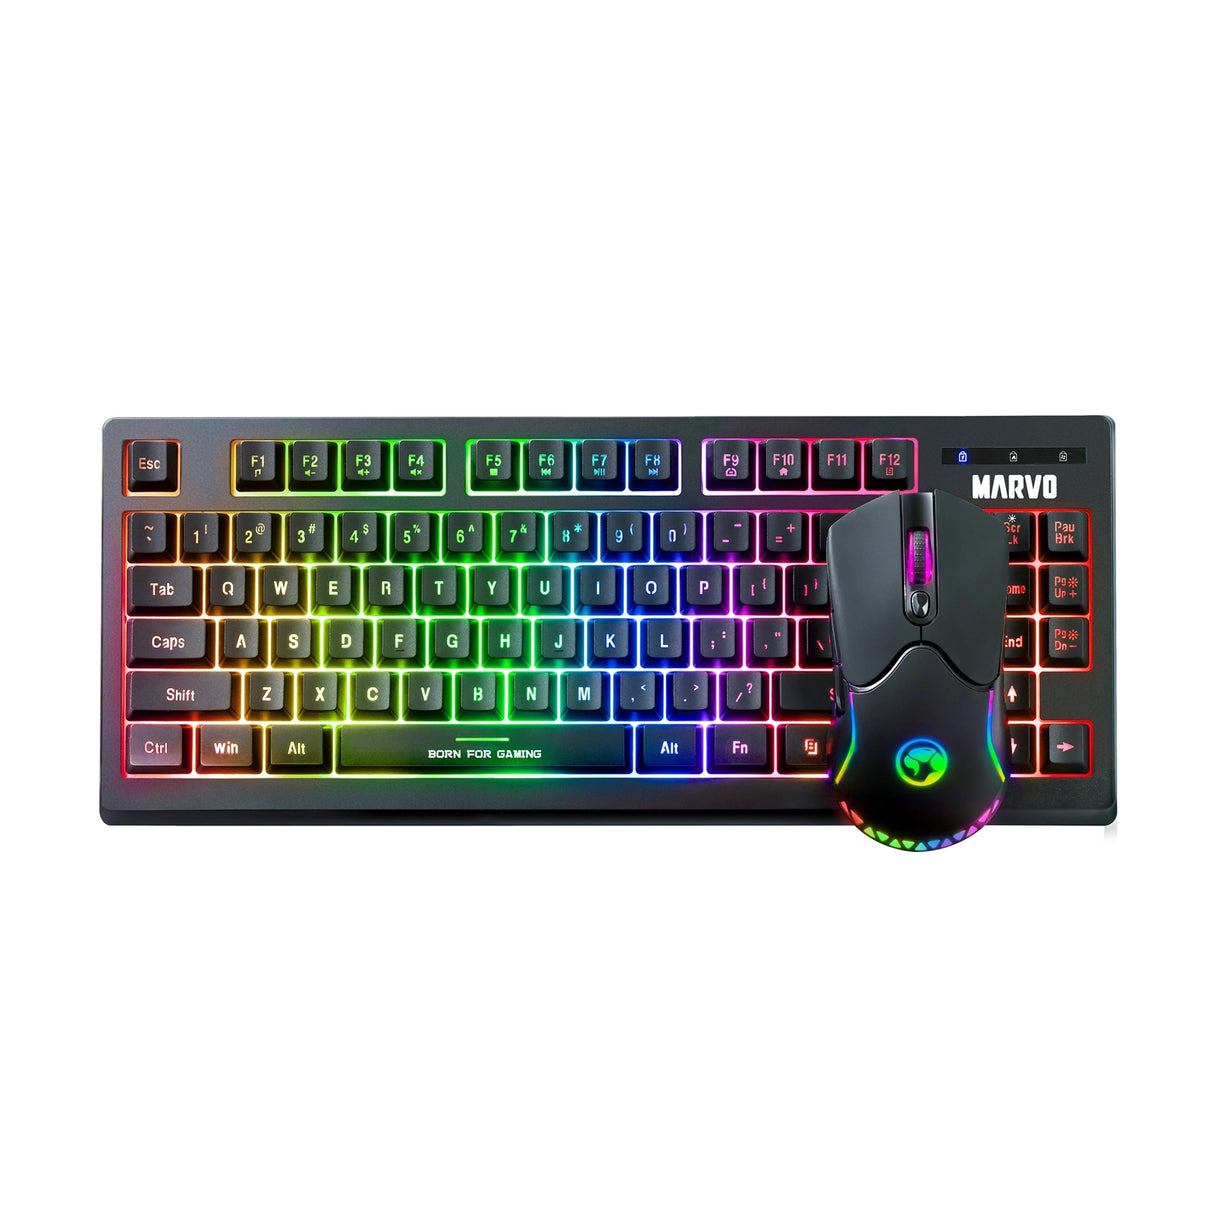 Marvo Scorpion KW516 Wireless TKL Gaming Keyboard and Mouse, 80% TKL Design, 2.4GHz Wireless Connection, RGB Backlight, Anti-ghosting with Optical Sensor Mouse 6 Level Adjustable dpi 800-4800, 7 Buttons